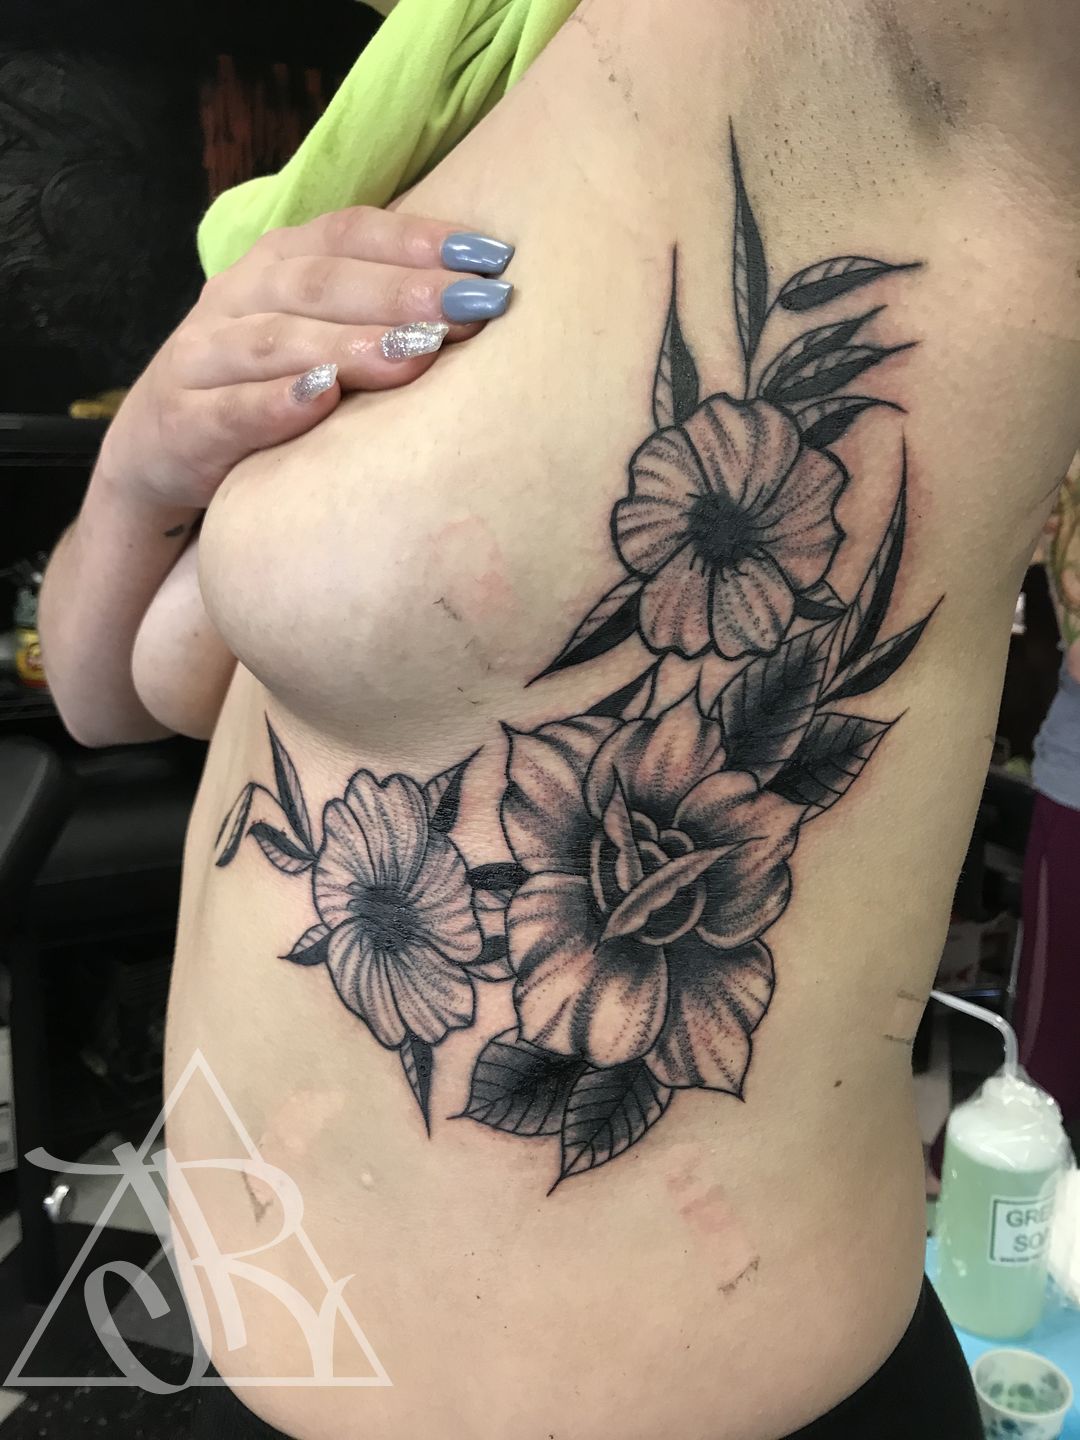 Columbine flower by Jenni Rogers at electric rooster, Melbourne, Aus : r/ tattoos